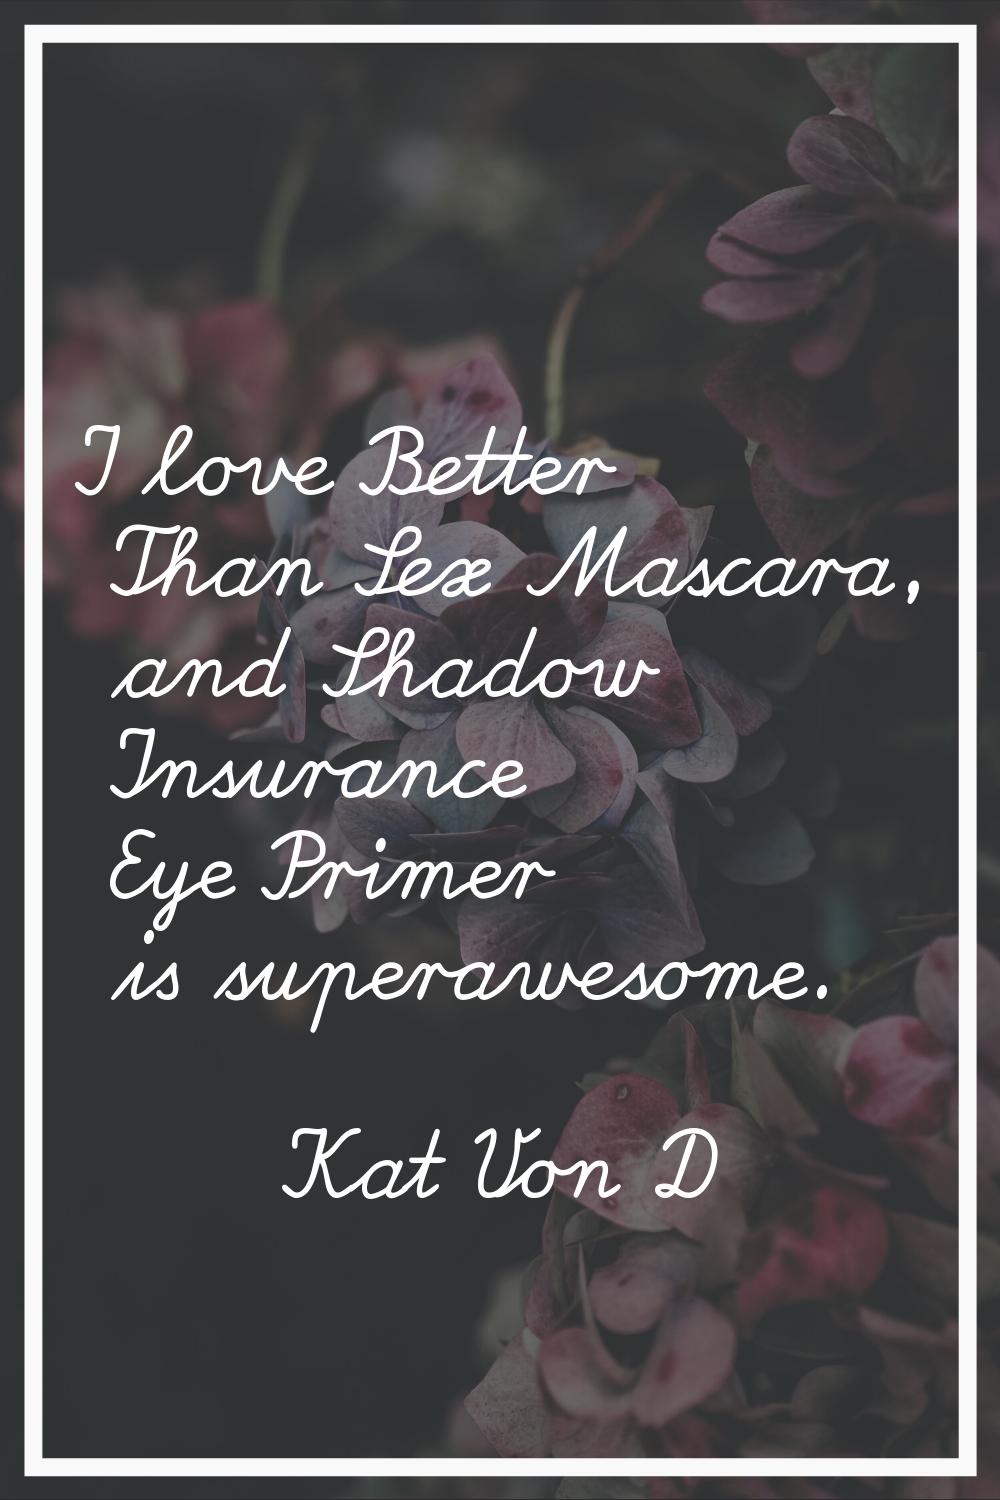 I love Better Than Sex Mascara, and Shadow Insurance Eye Primer is superawesome.